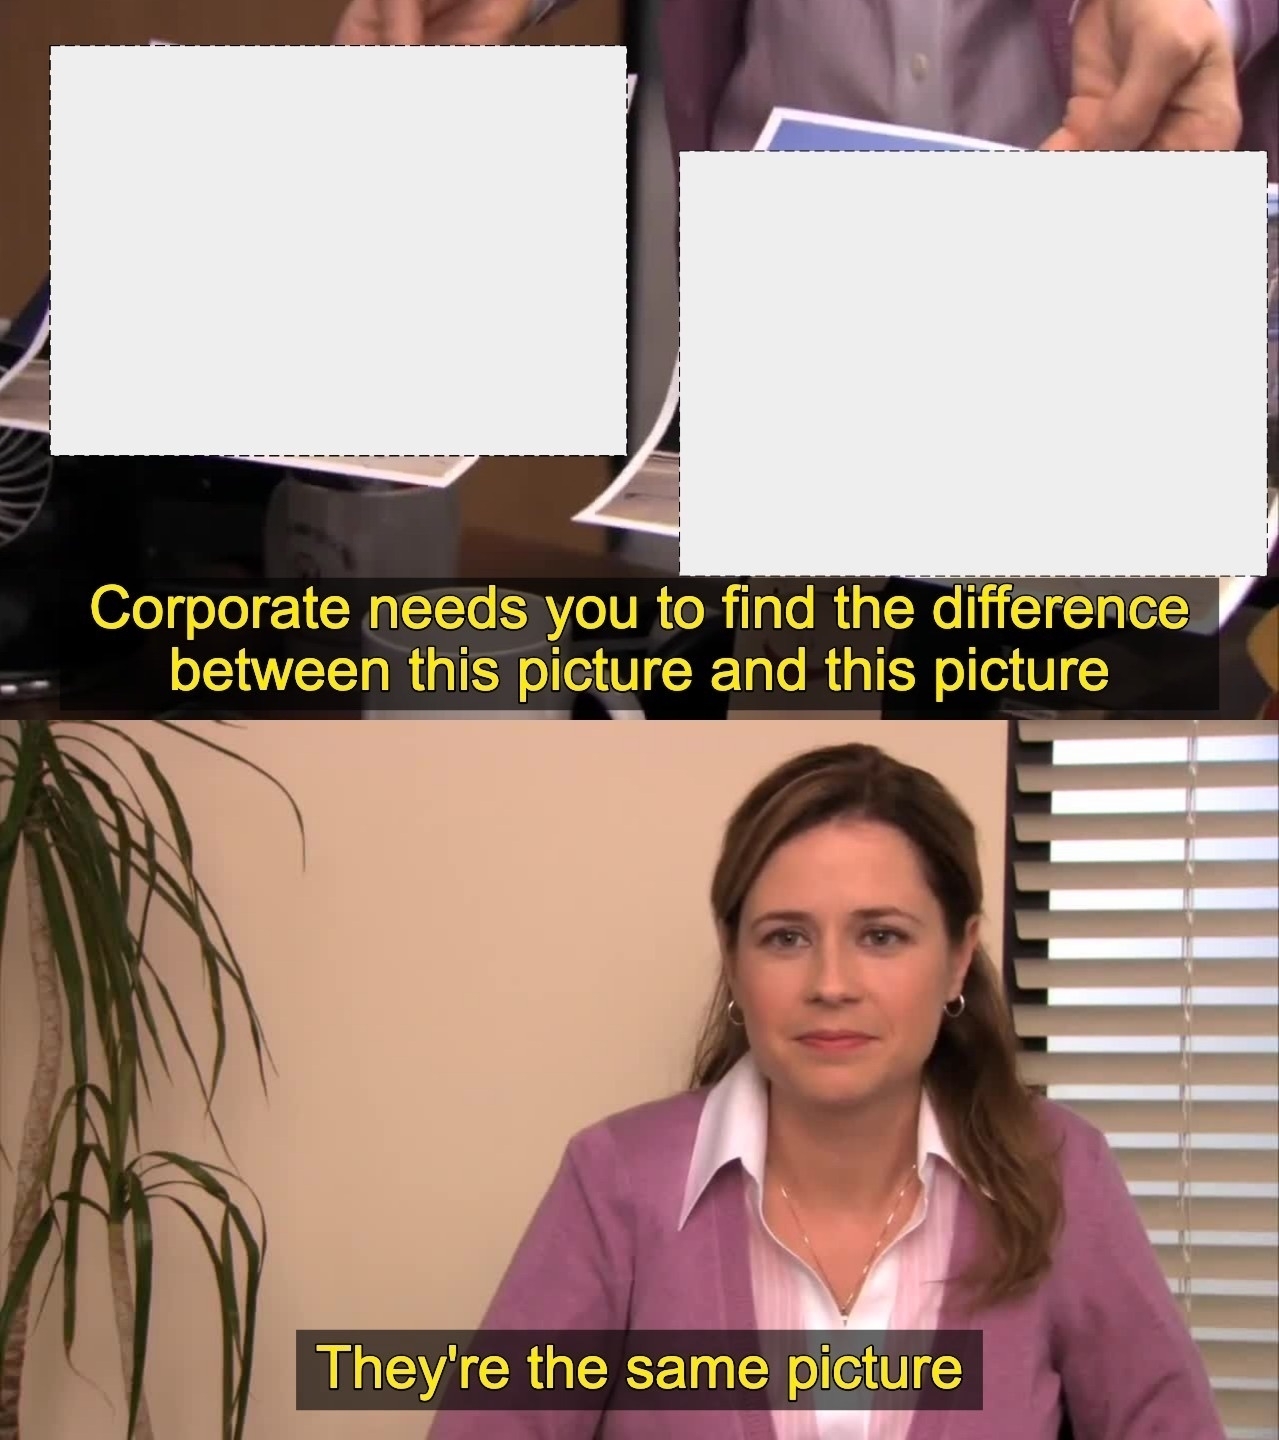 The Office, 'It's the same picture,' meme.